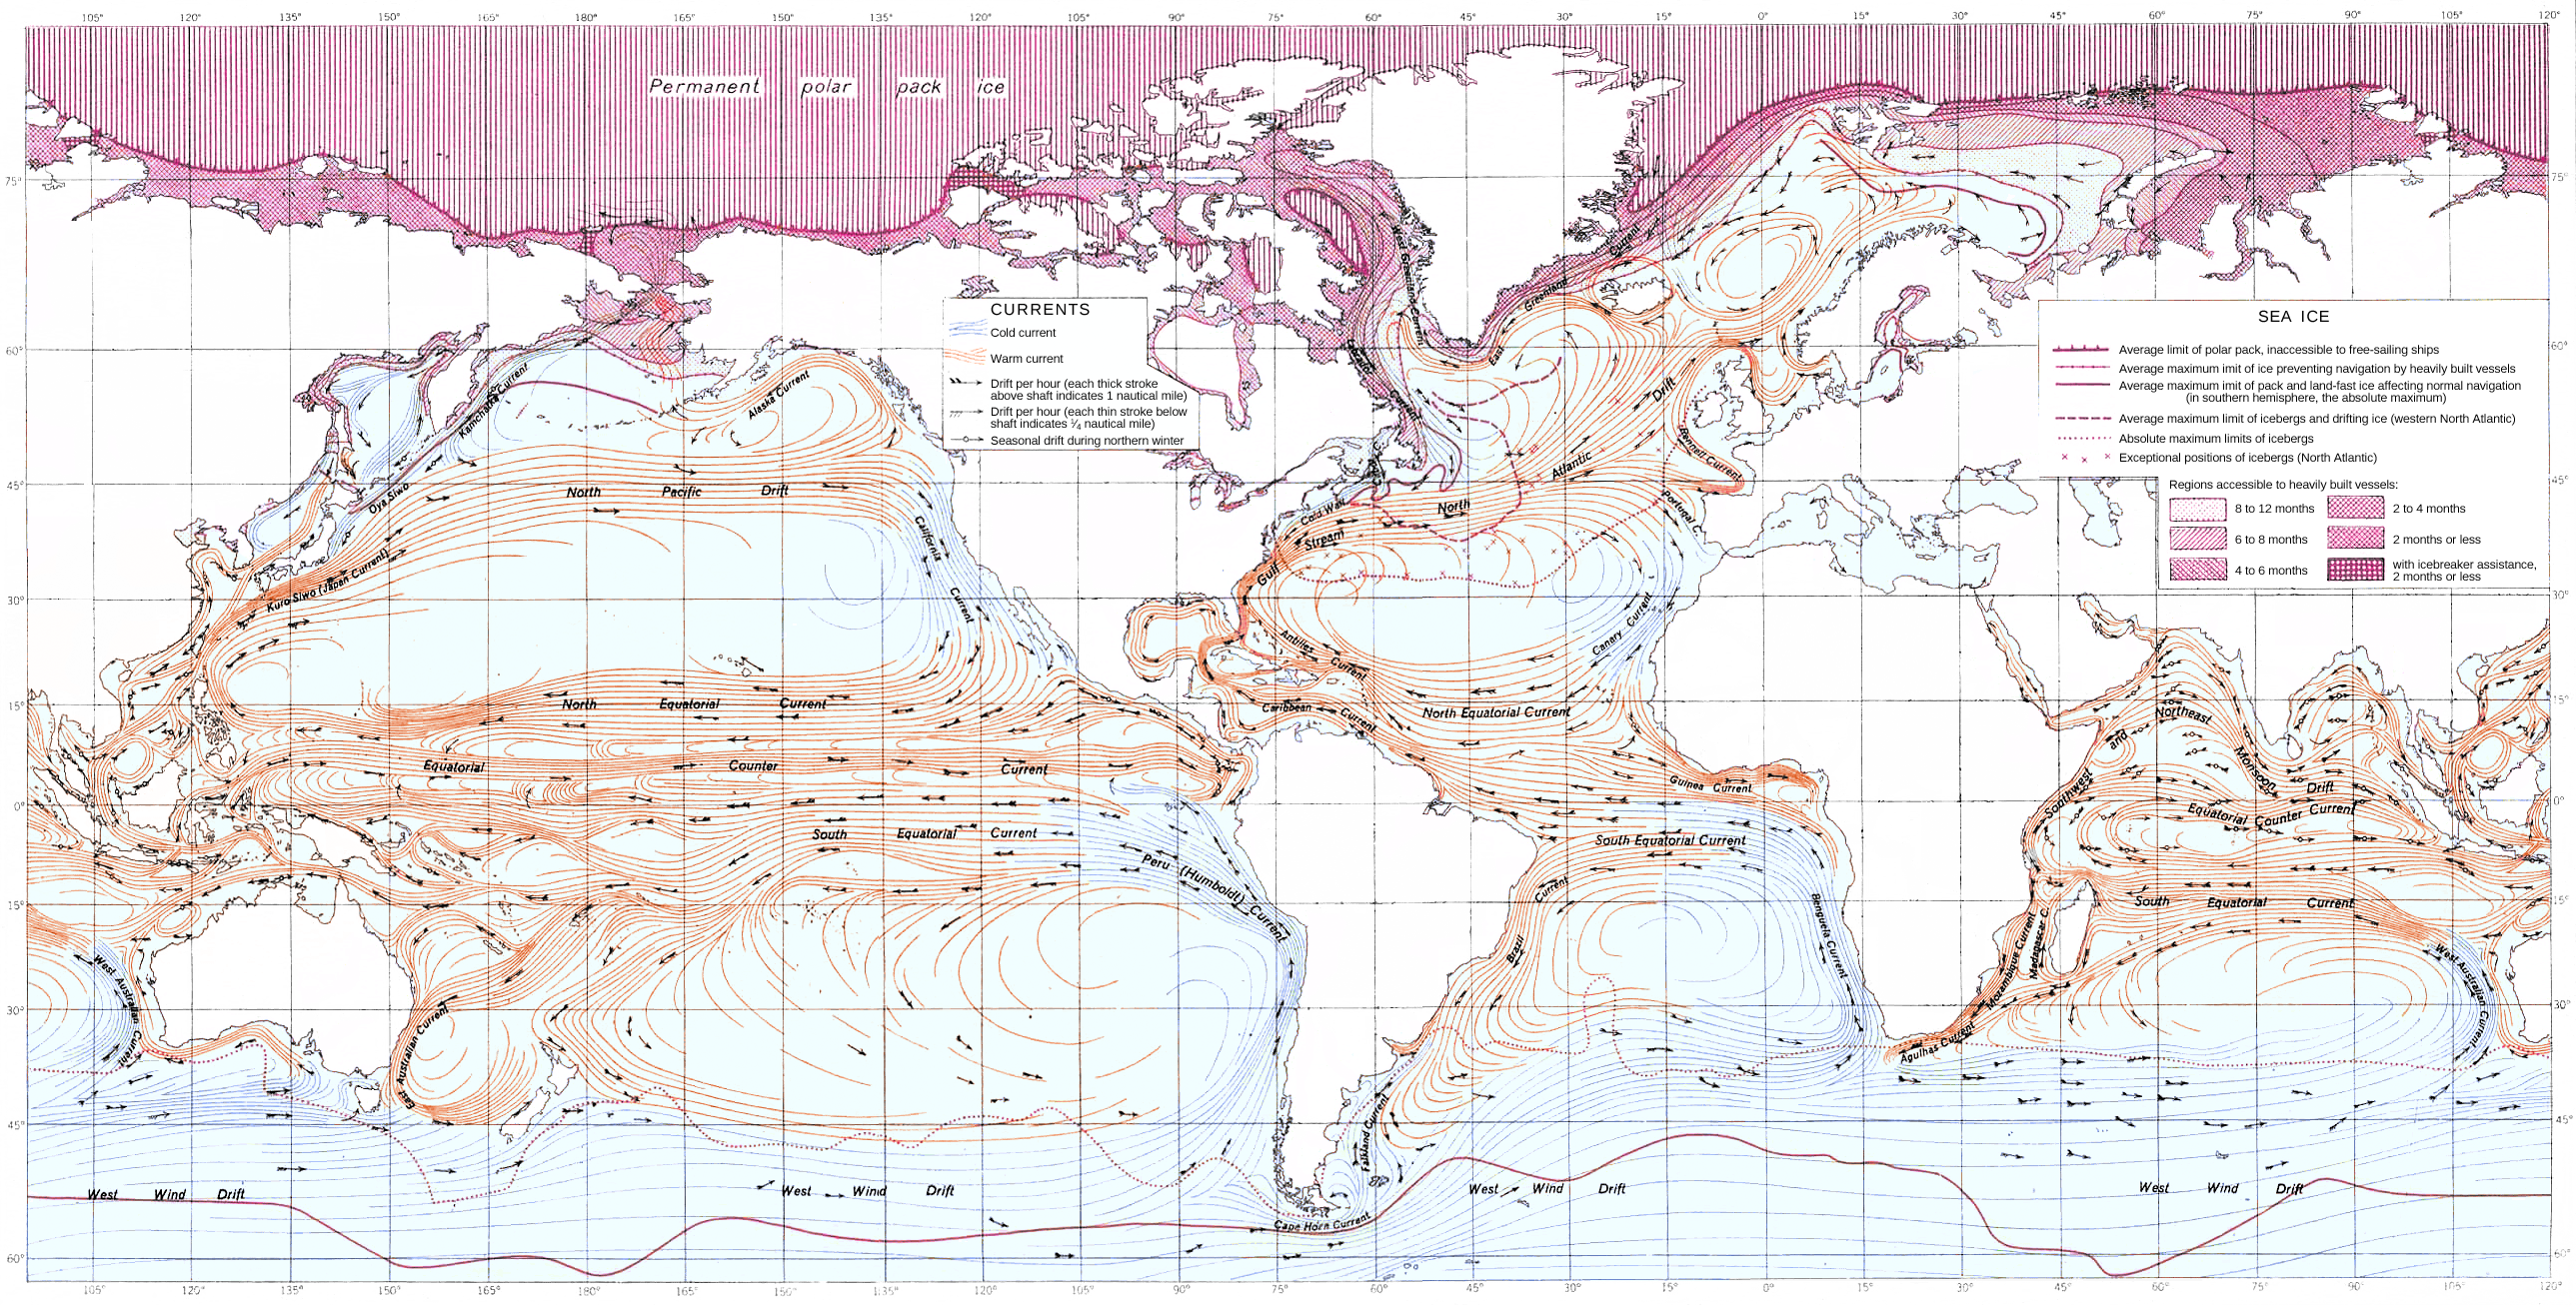 Ocean_currents_1943_for_colorblind_users.png